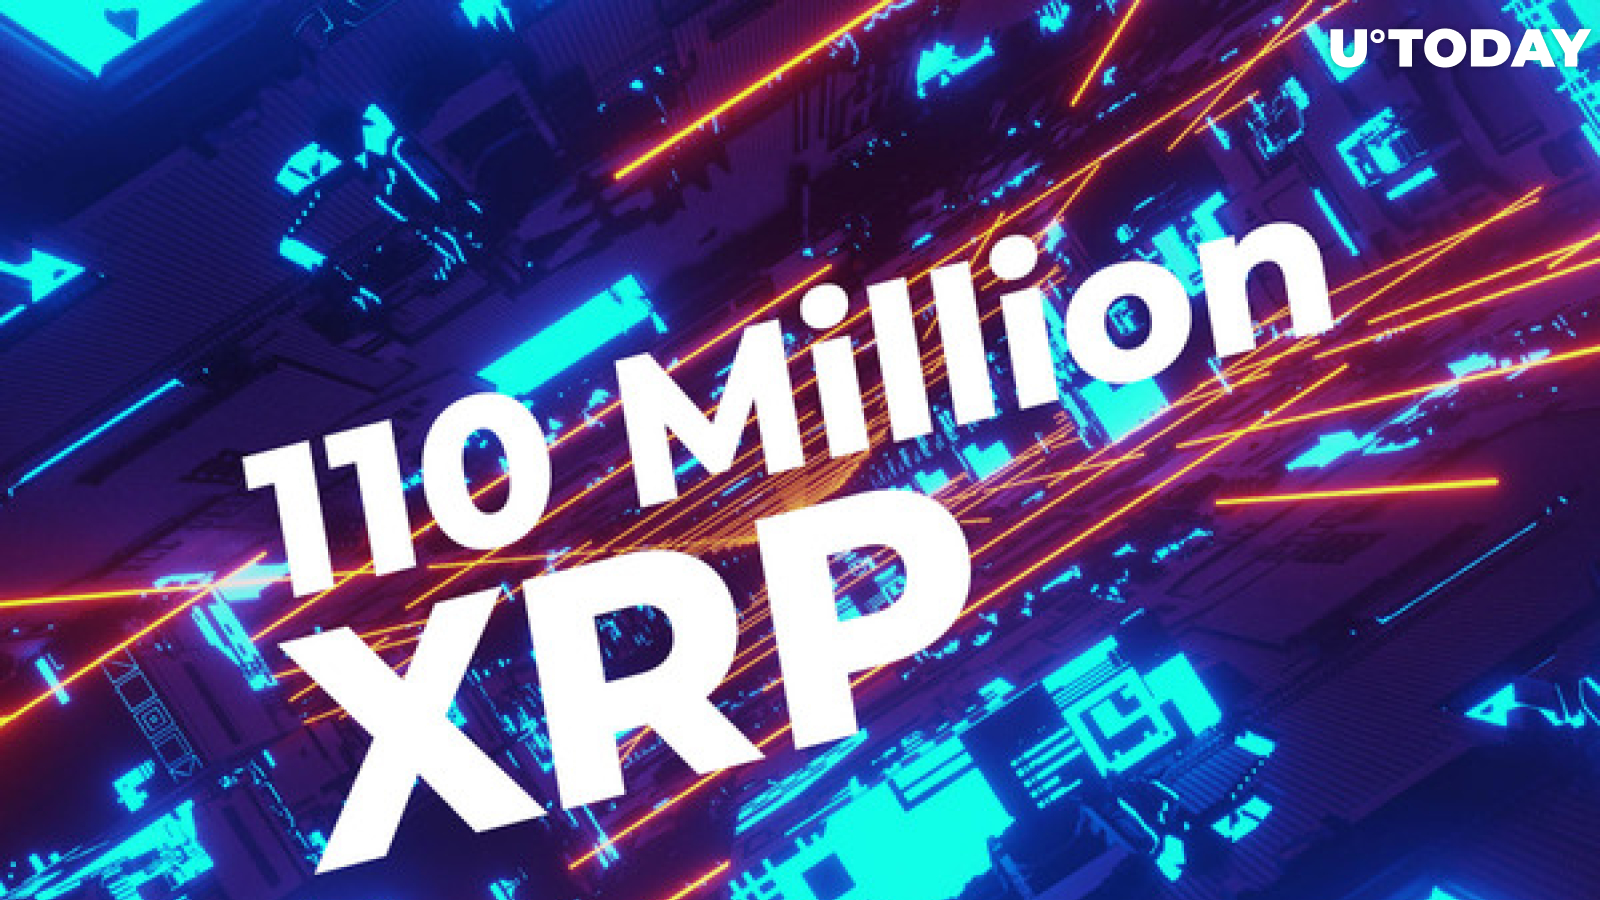 110 Million XRP Moved by Huobi, Binance and Other Exchanges, While Coin Hits $1.96 